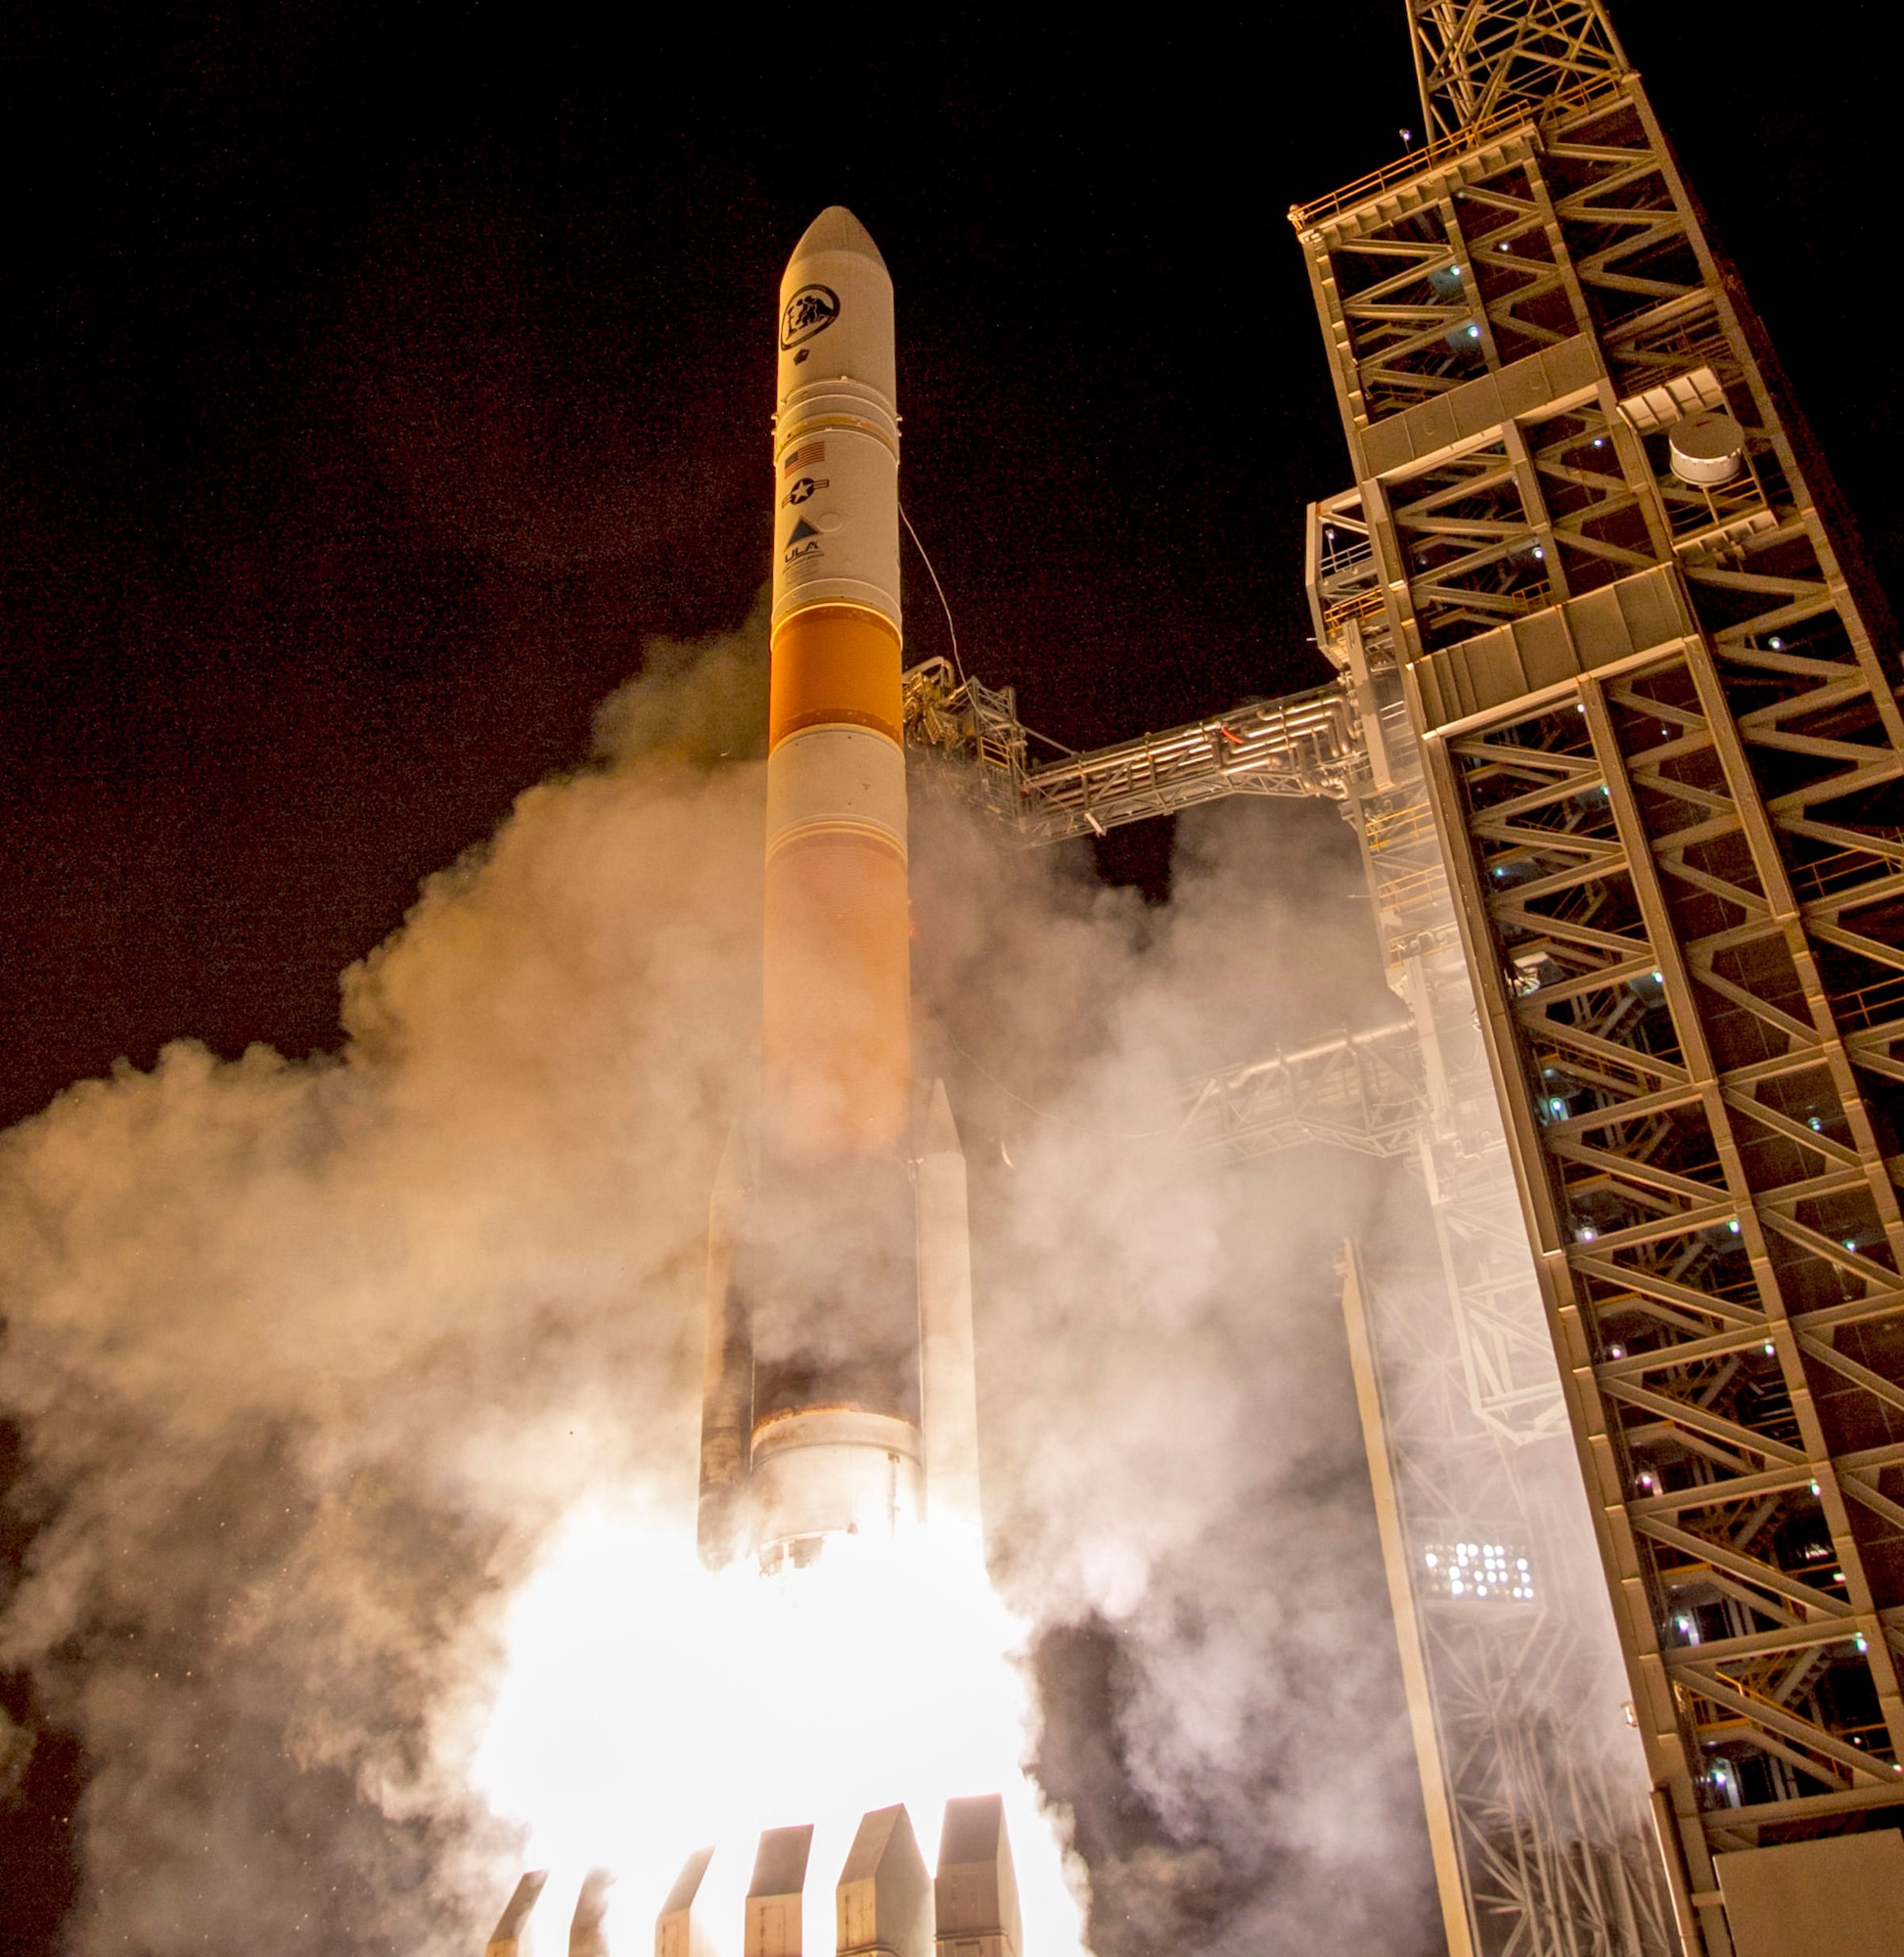 A United Launch Alliance Delta IV Medium+ (5,2) rocket successfully delivered a satellite, designated NROL-45, to orbit for the National Reconnaissance Office. Aided by a pair of side-mounted solid rocket motors and a liquid hydrogen-fueled RS-68 main engine, the 217-foot-tall orange and white two-stage Delta IV lifted off under more than a million pounds of thrust at 3:40 a.m. PST Feb. 10, 2016 from Space Launch Complex-6 at Vandenberg Air Force Base, located in northern Santa Barbara County on California's Central Coast. (Courtesy photo: ULA)